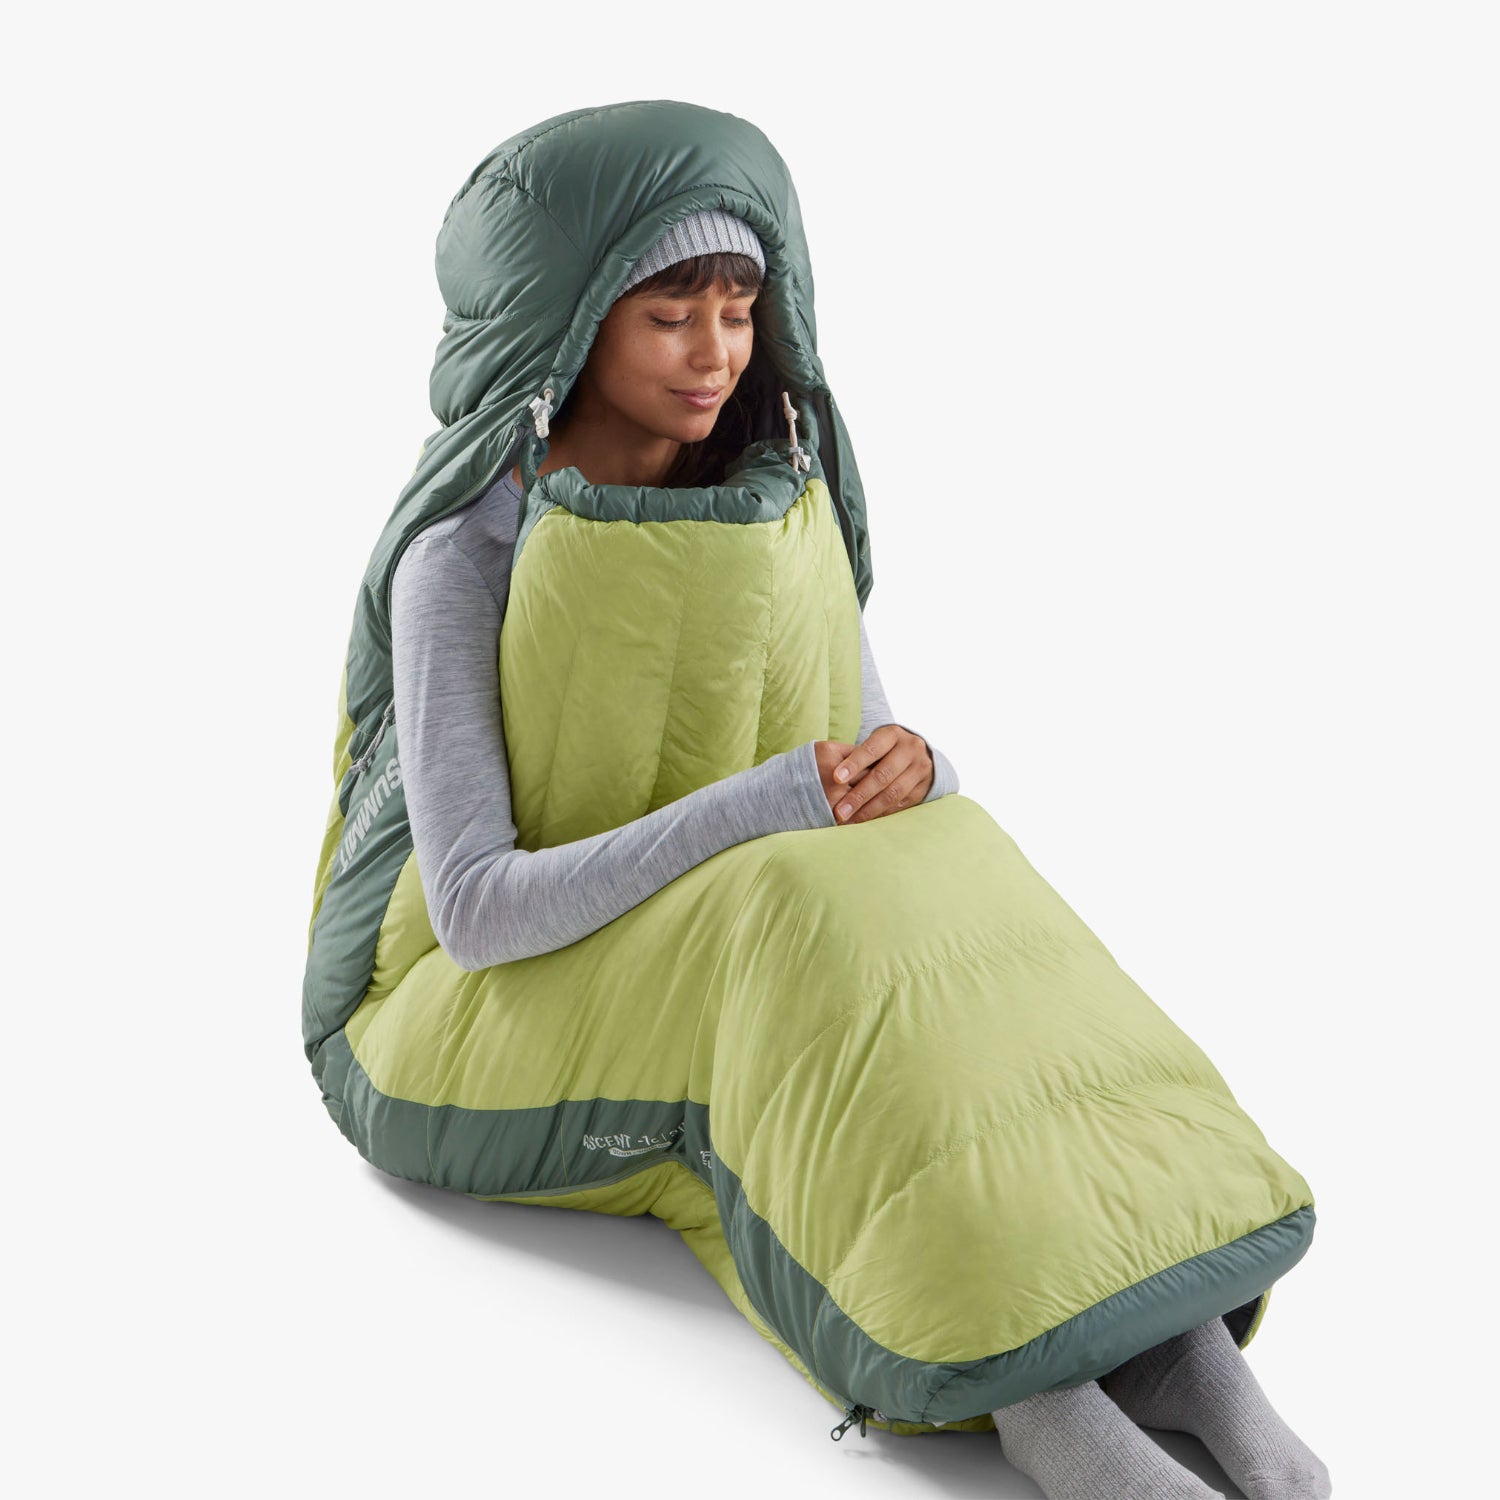 Sea to Summit Ascent Womens Down Sleeping Bag -9°C in colory green